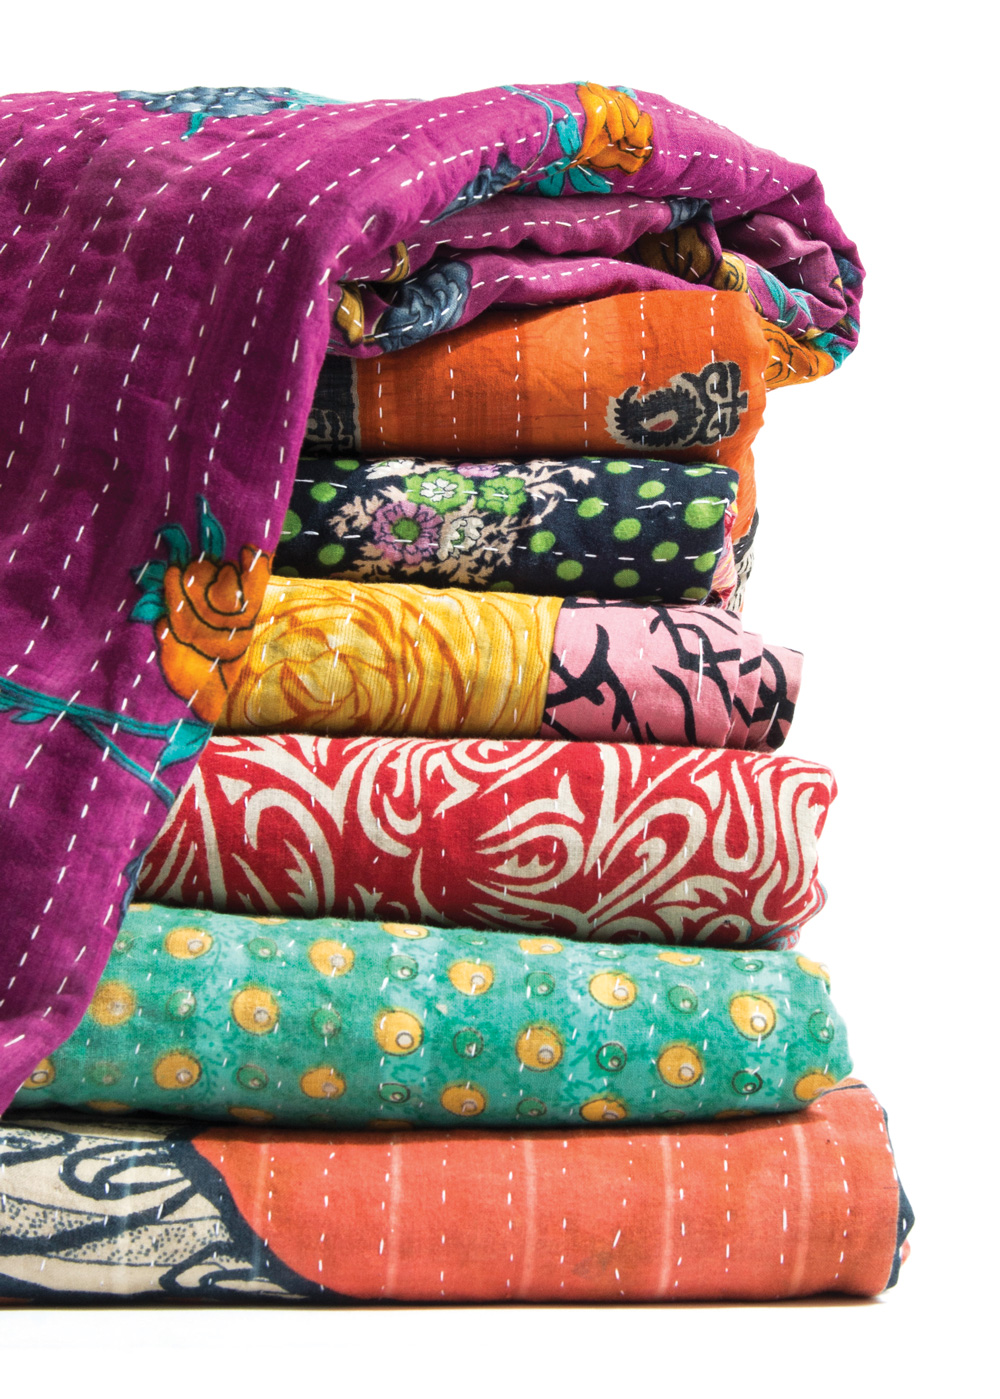 What Is A Kantha Quilt?